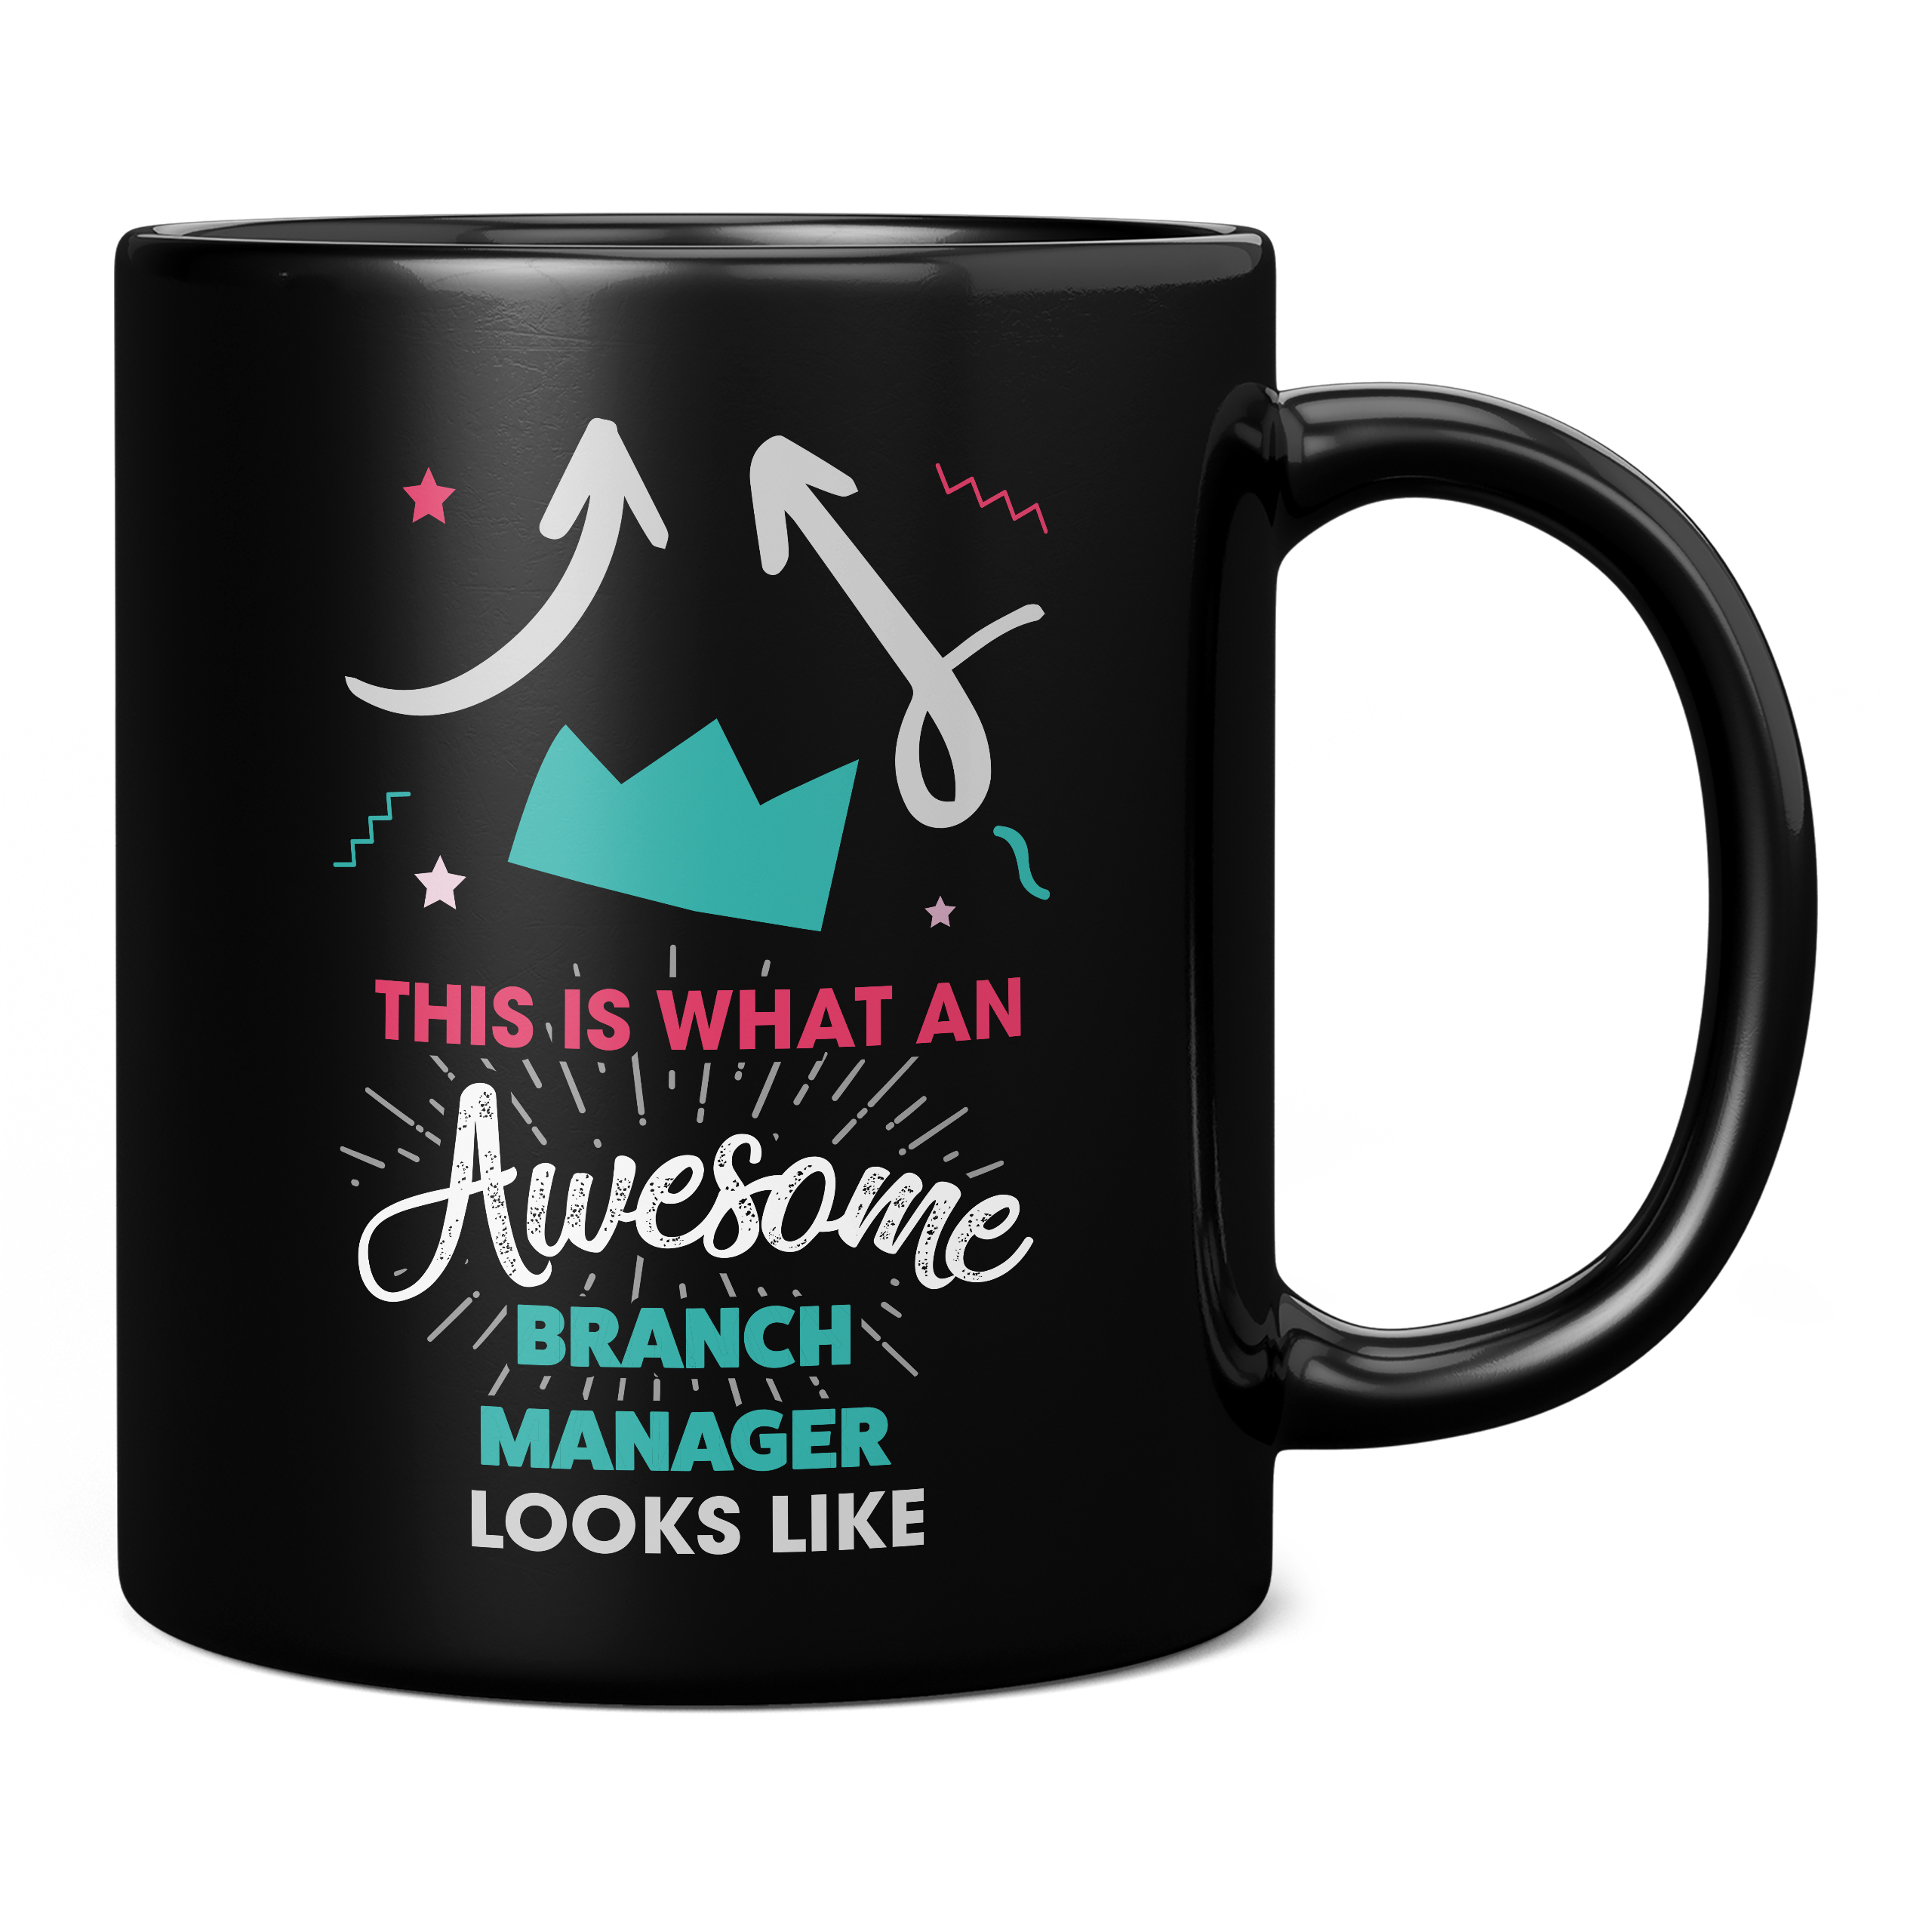 THIS IS WHAT AN AWESOME BRANCH MANAGER LOOKS LIKE 11OZ NOVELTY MUG